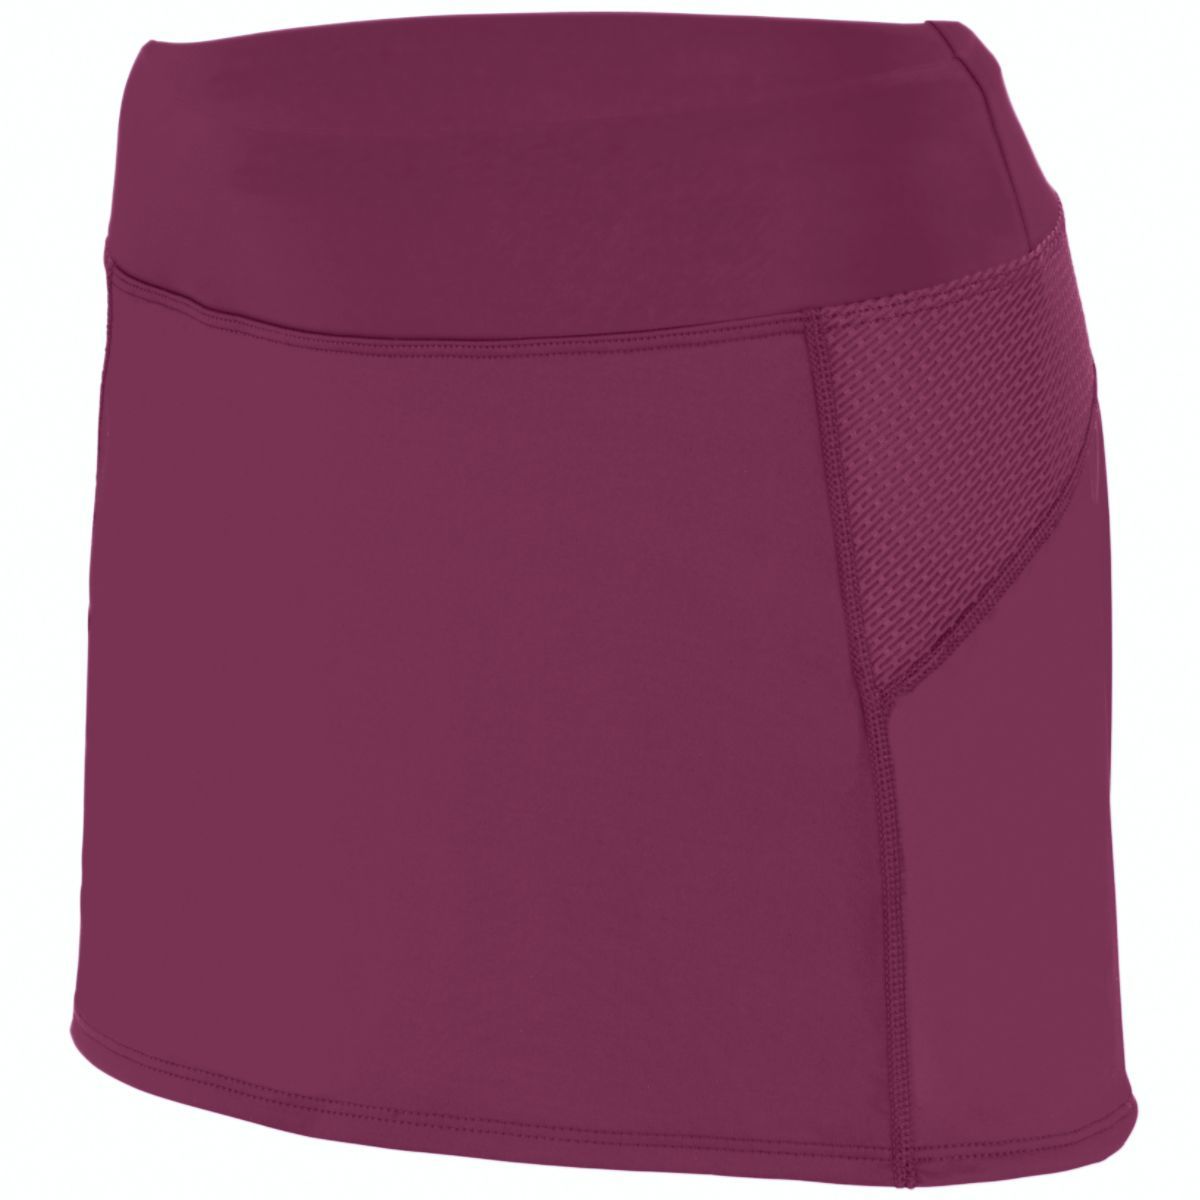 Augusta Sportswear Ladies Femfit Skort in Maroon/Graphite  -Part of the Ladies, Augusta-Products product lines at KanaleyCreations.com